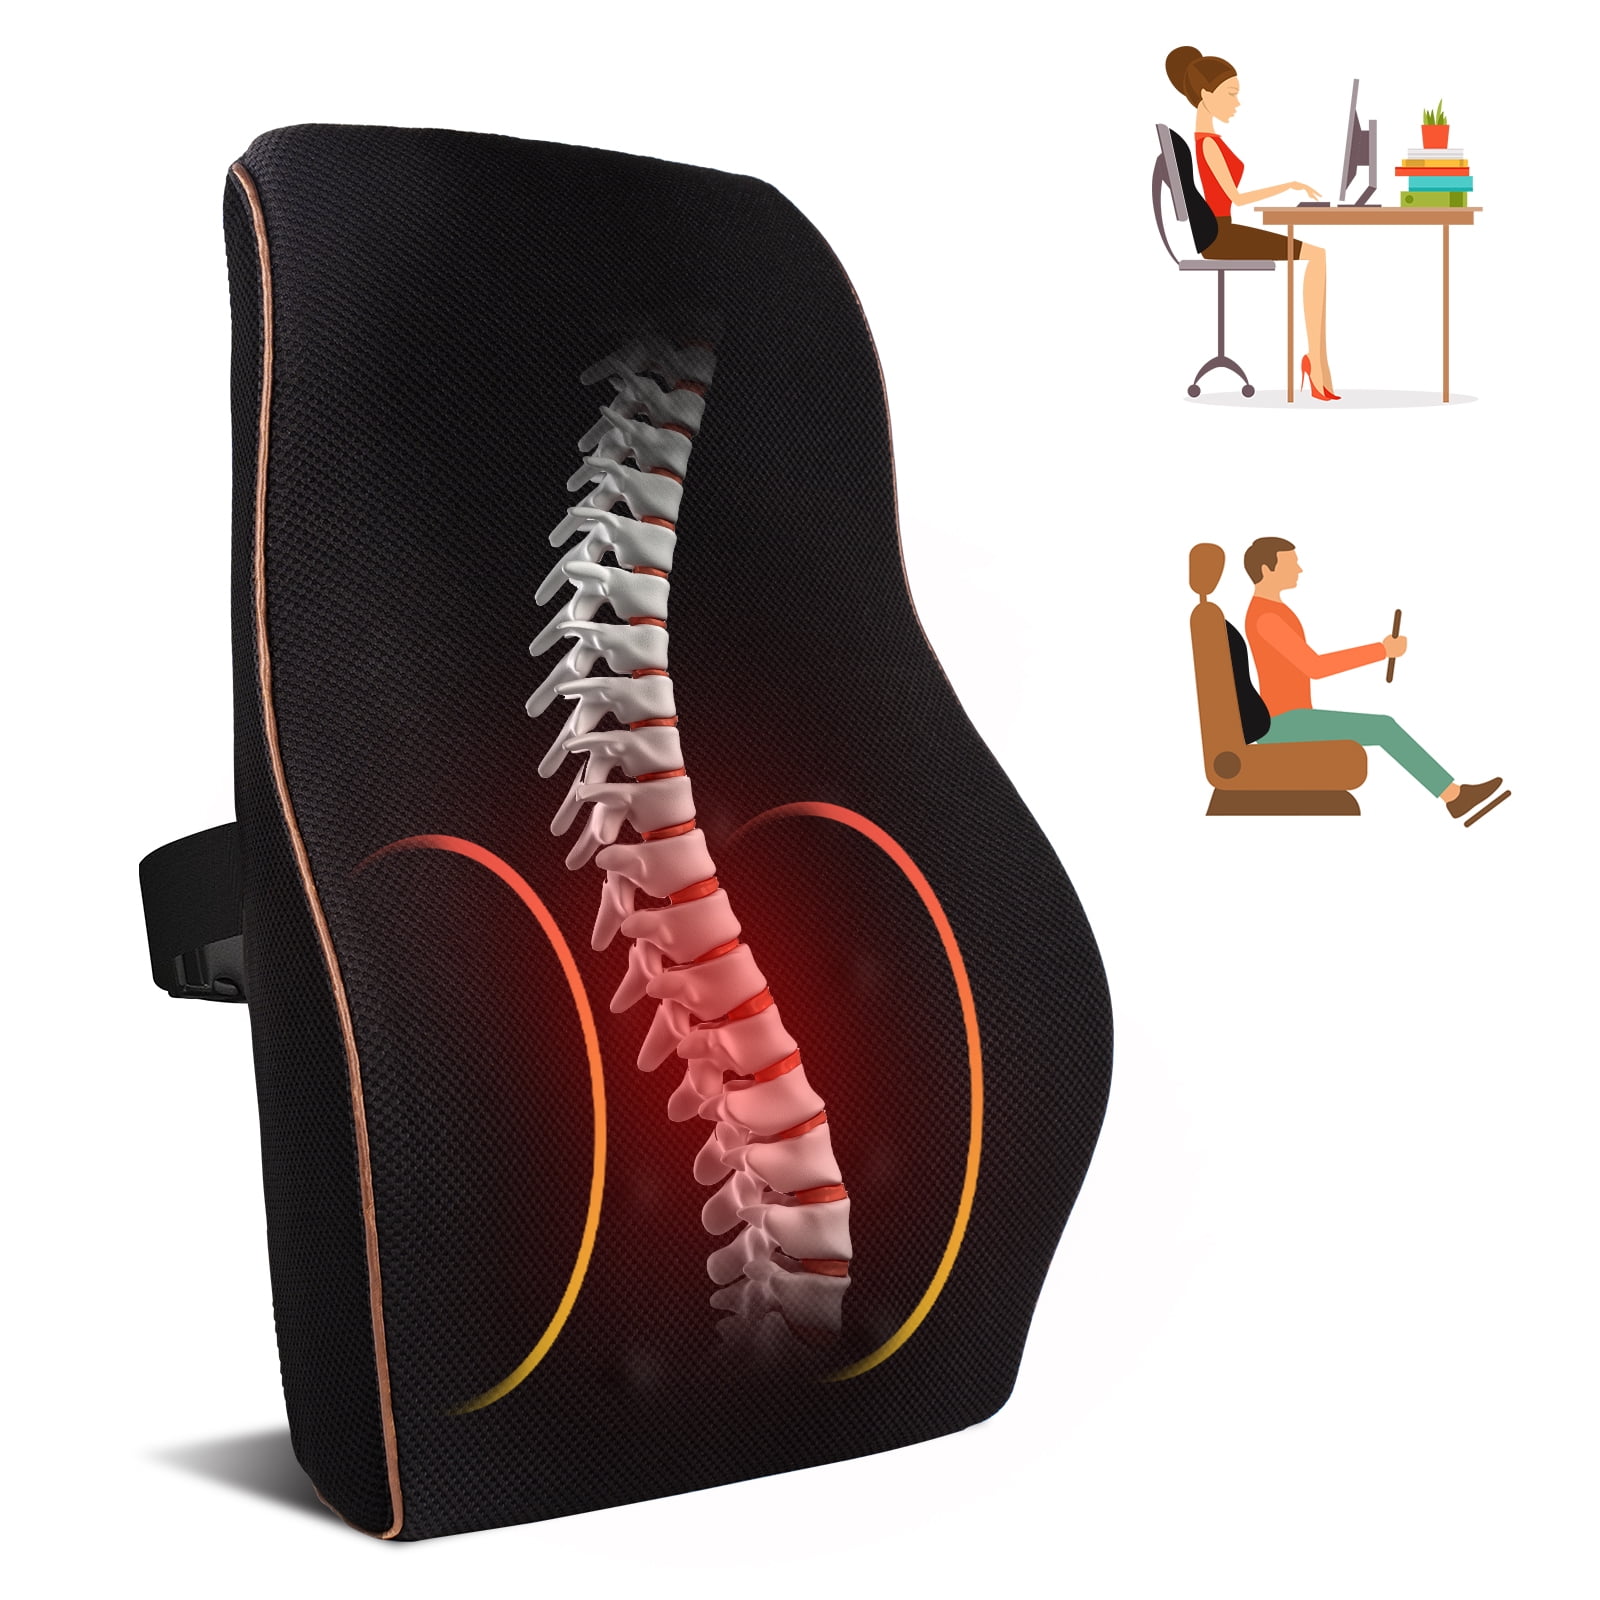 kasney Lumbar Support Pillow for Office Chair and Car Seat, Neo Cushion for  Low Back Pain Relief, Memory Foam Back Support Pillow for Gaming Chair